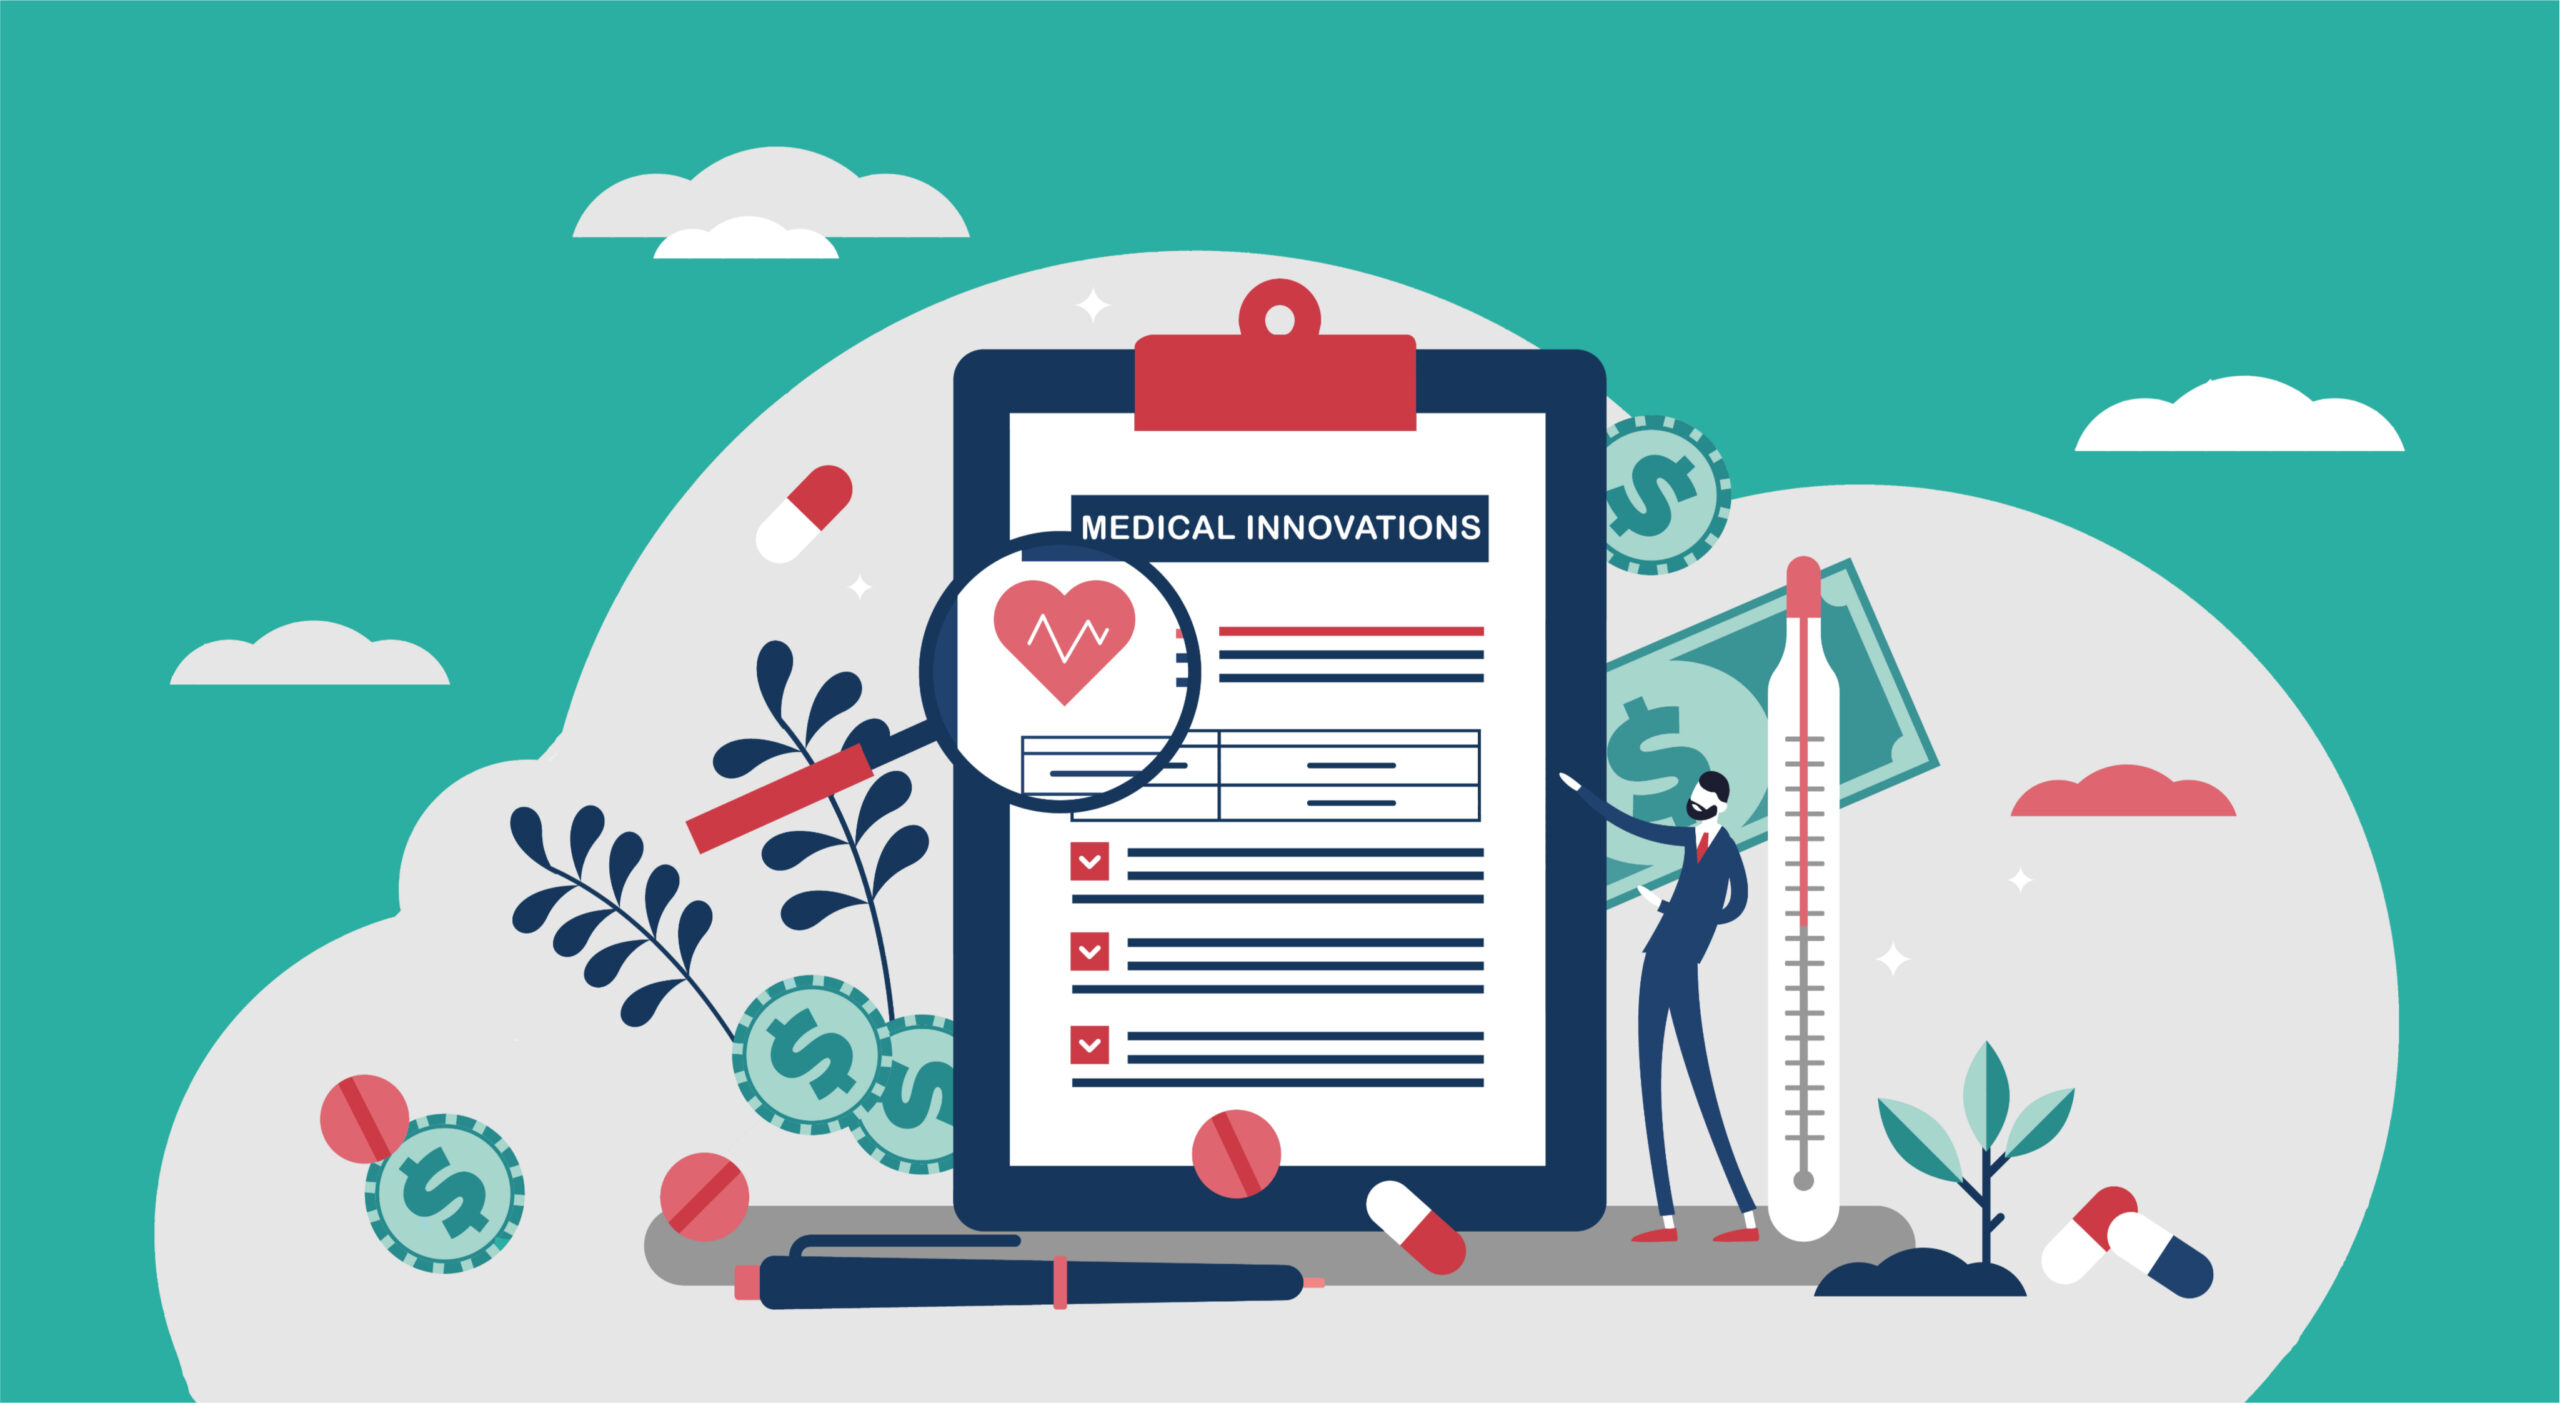 Paradigm shift in health: How to quantify the Social Impact of medical innovations